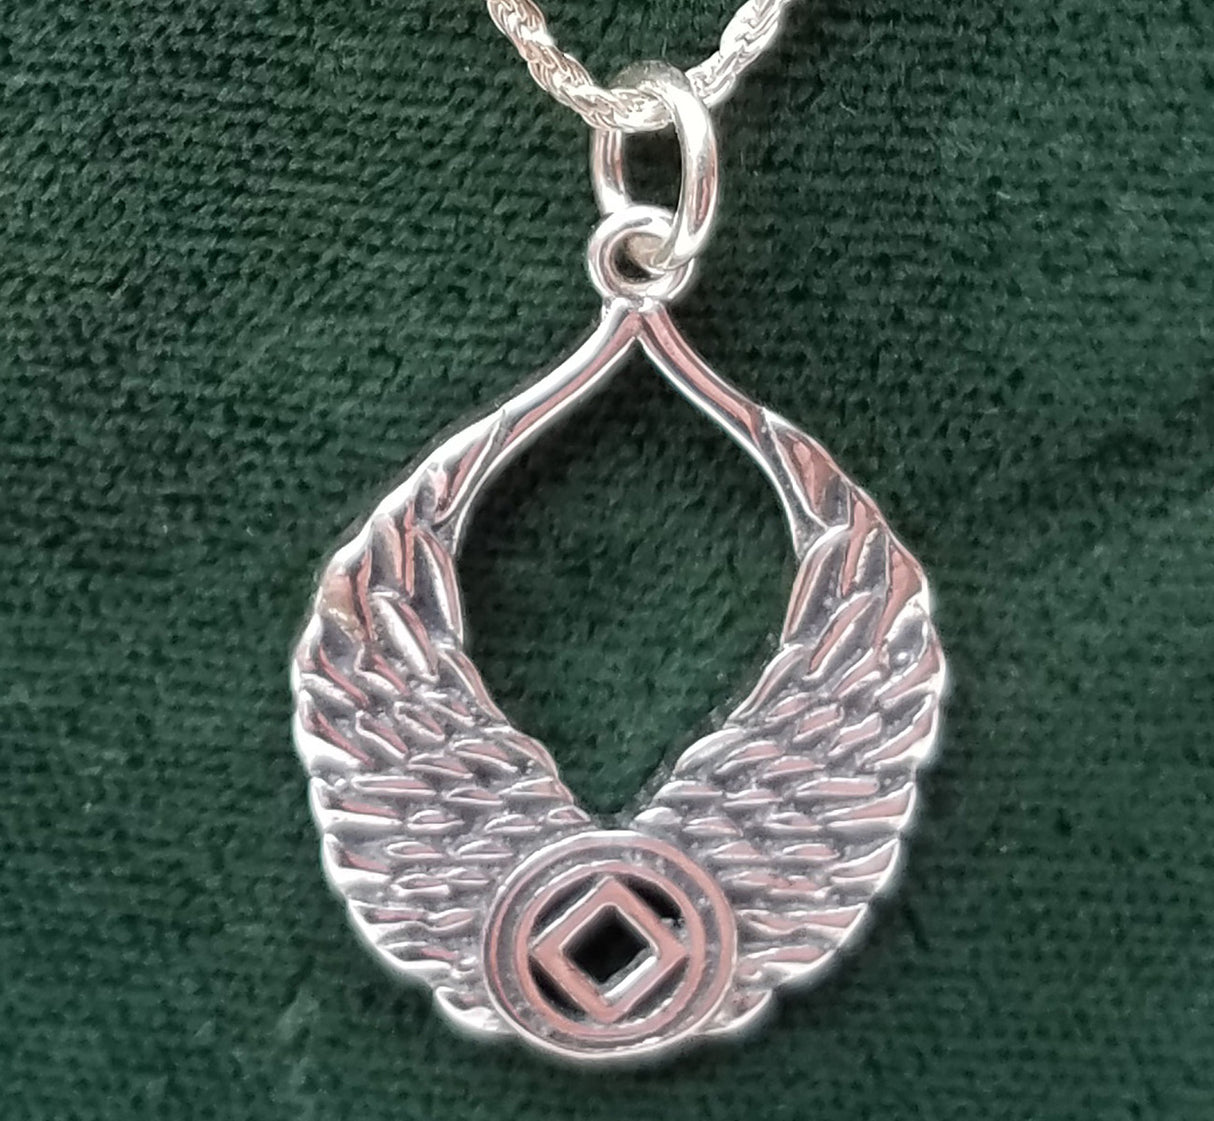 Silver WINGS WITH NA SYMBOL PENDANT - nawears